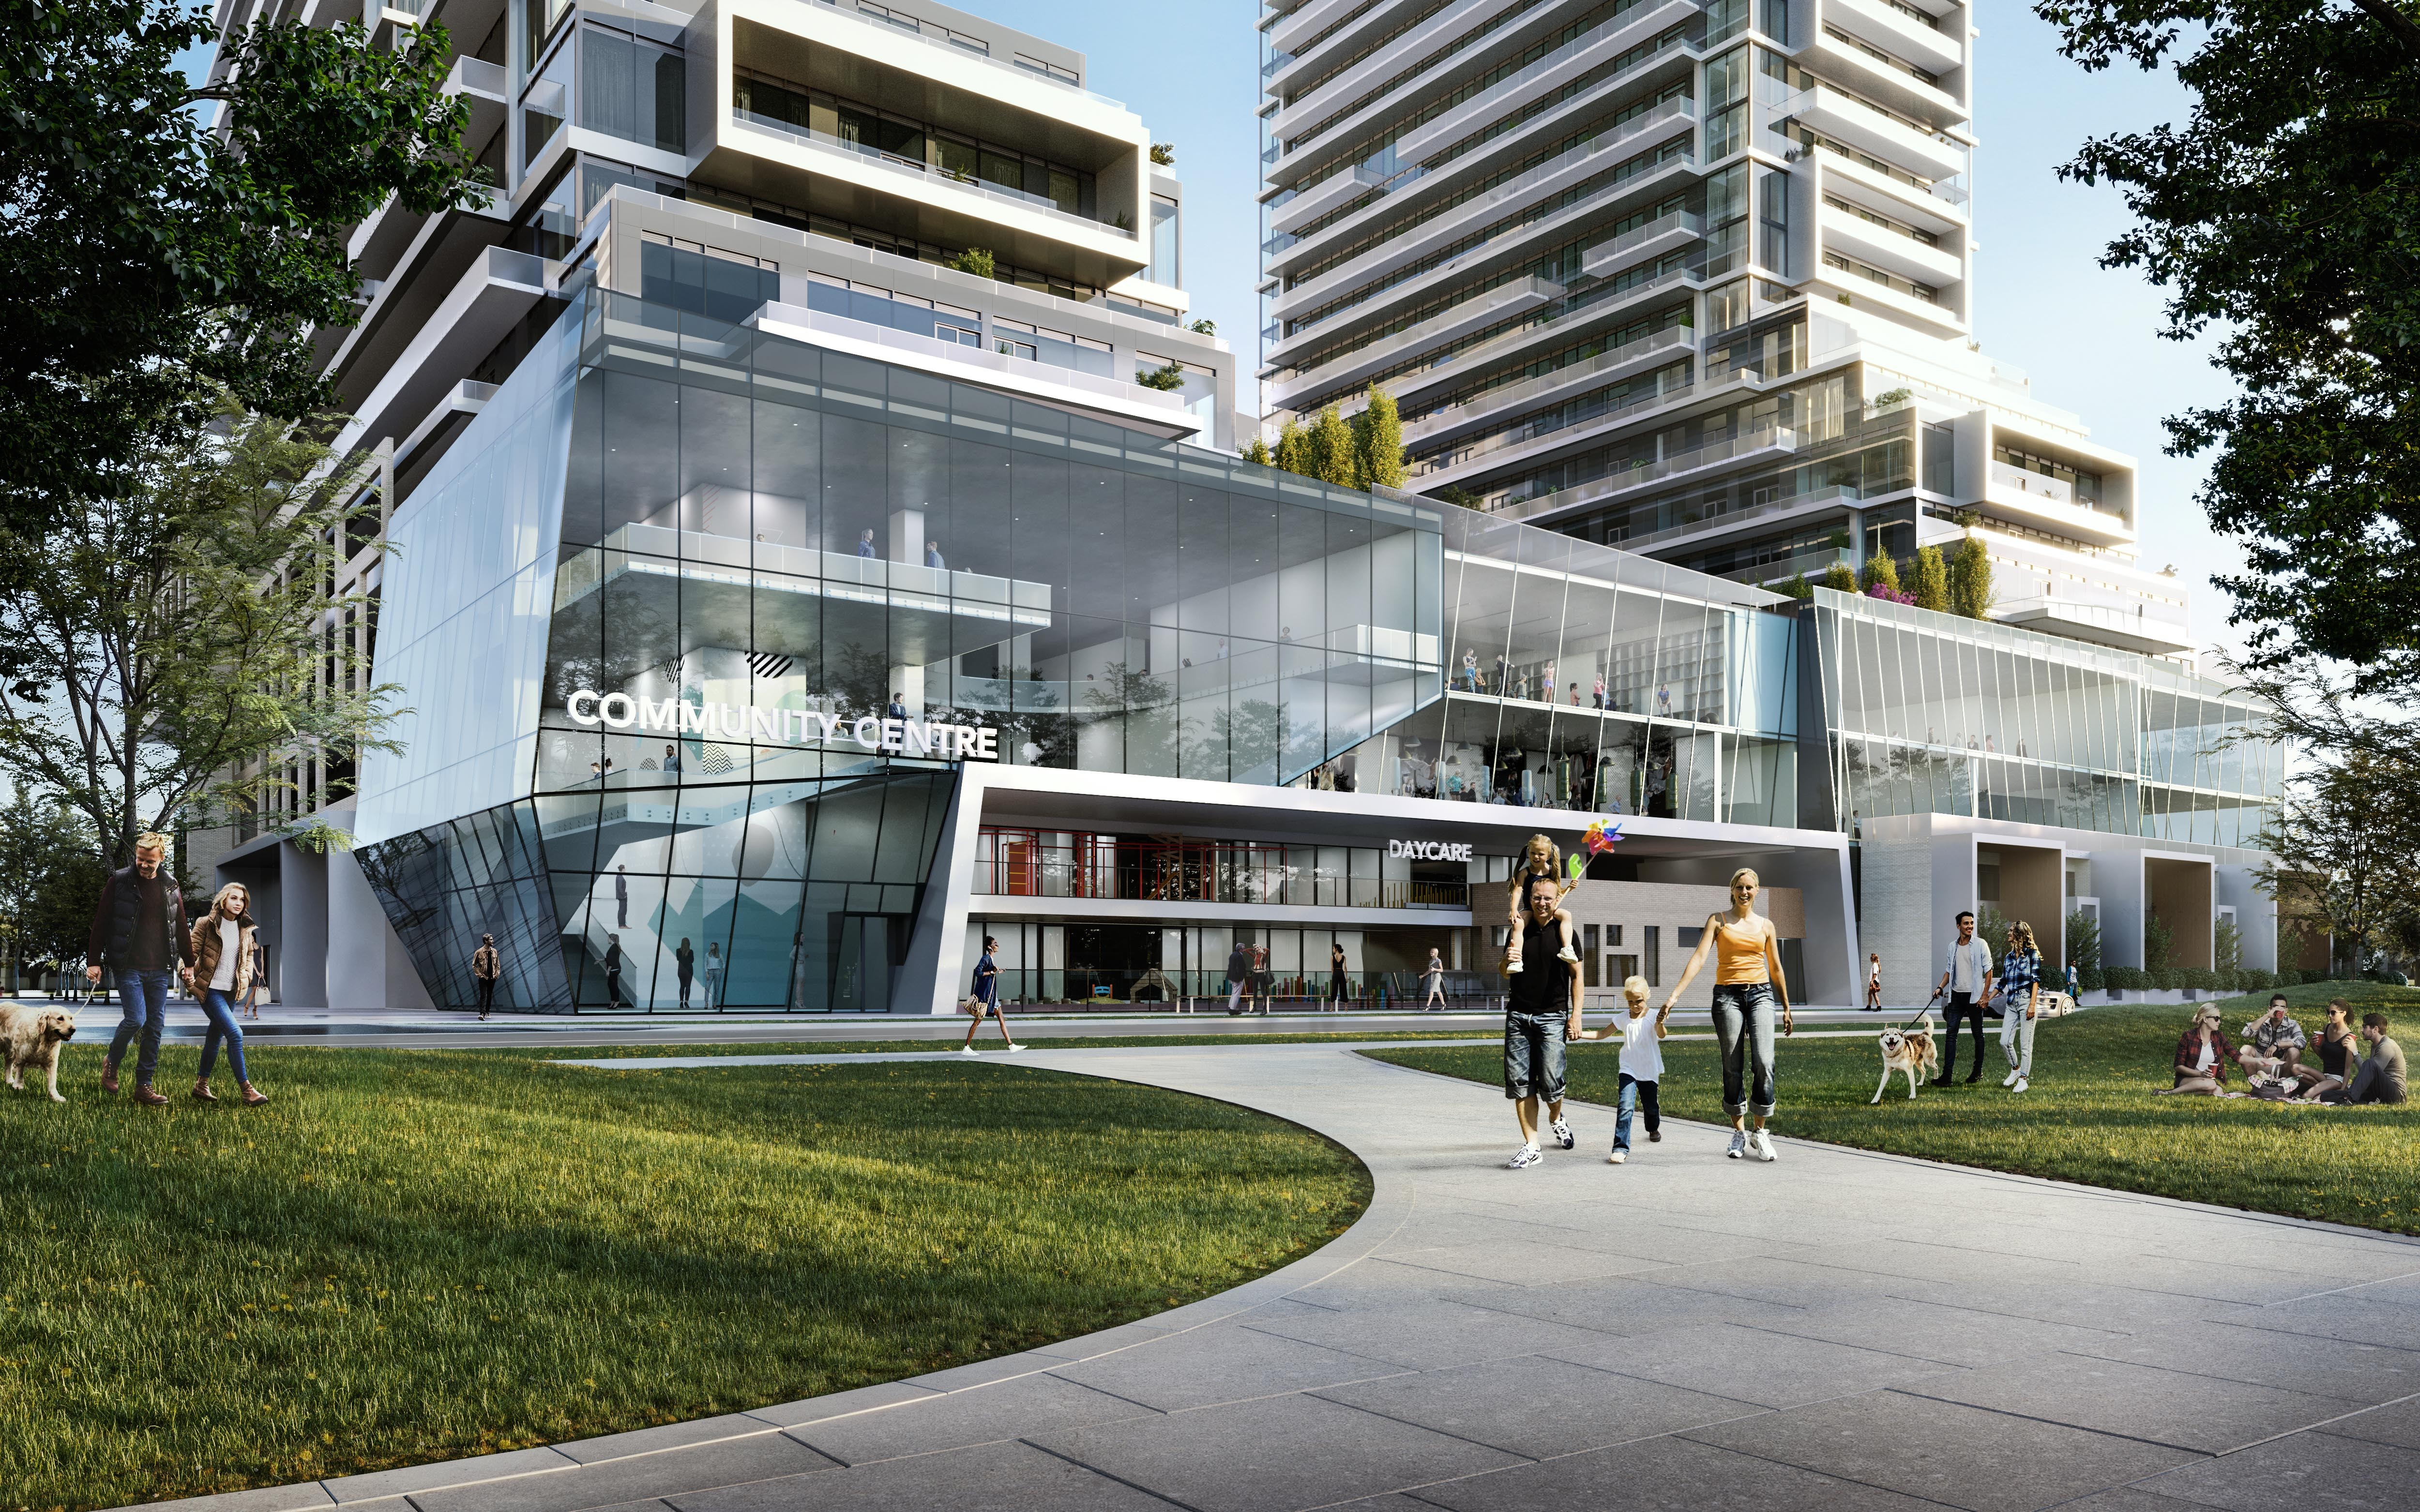 Community centre and park at M2M SQUARED, Toronto, image courtesy of Aoyuan International